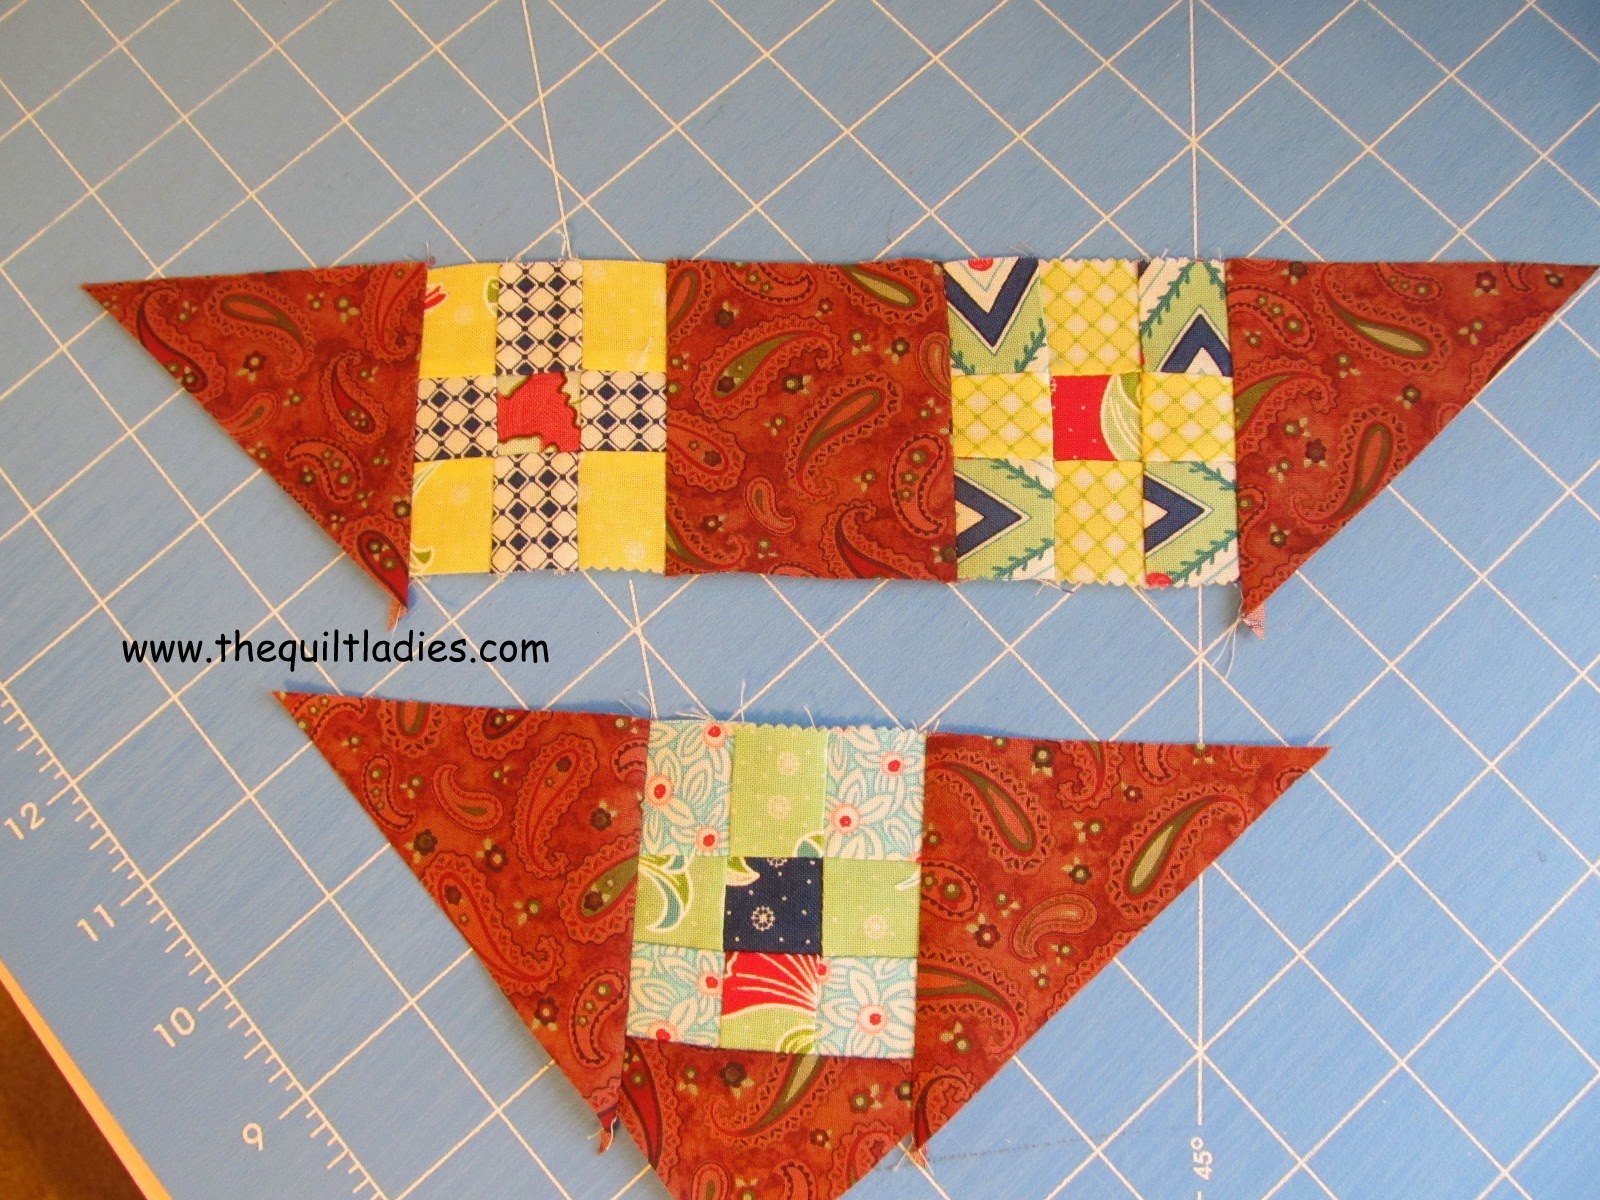 Nine Patch Quilted Table Topper Tutorial by The Quilt Ladies